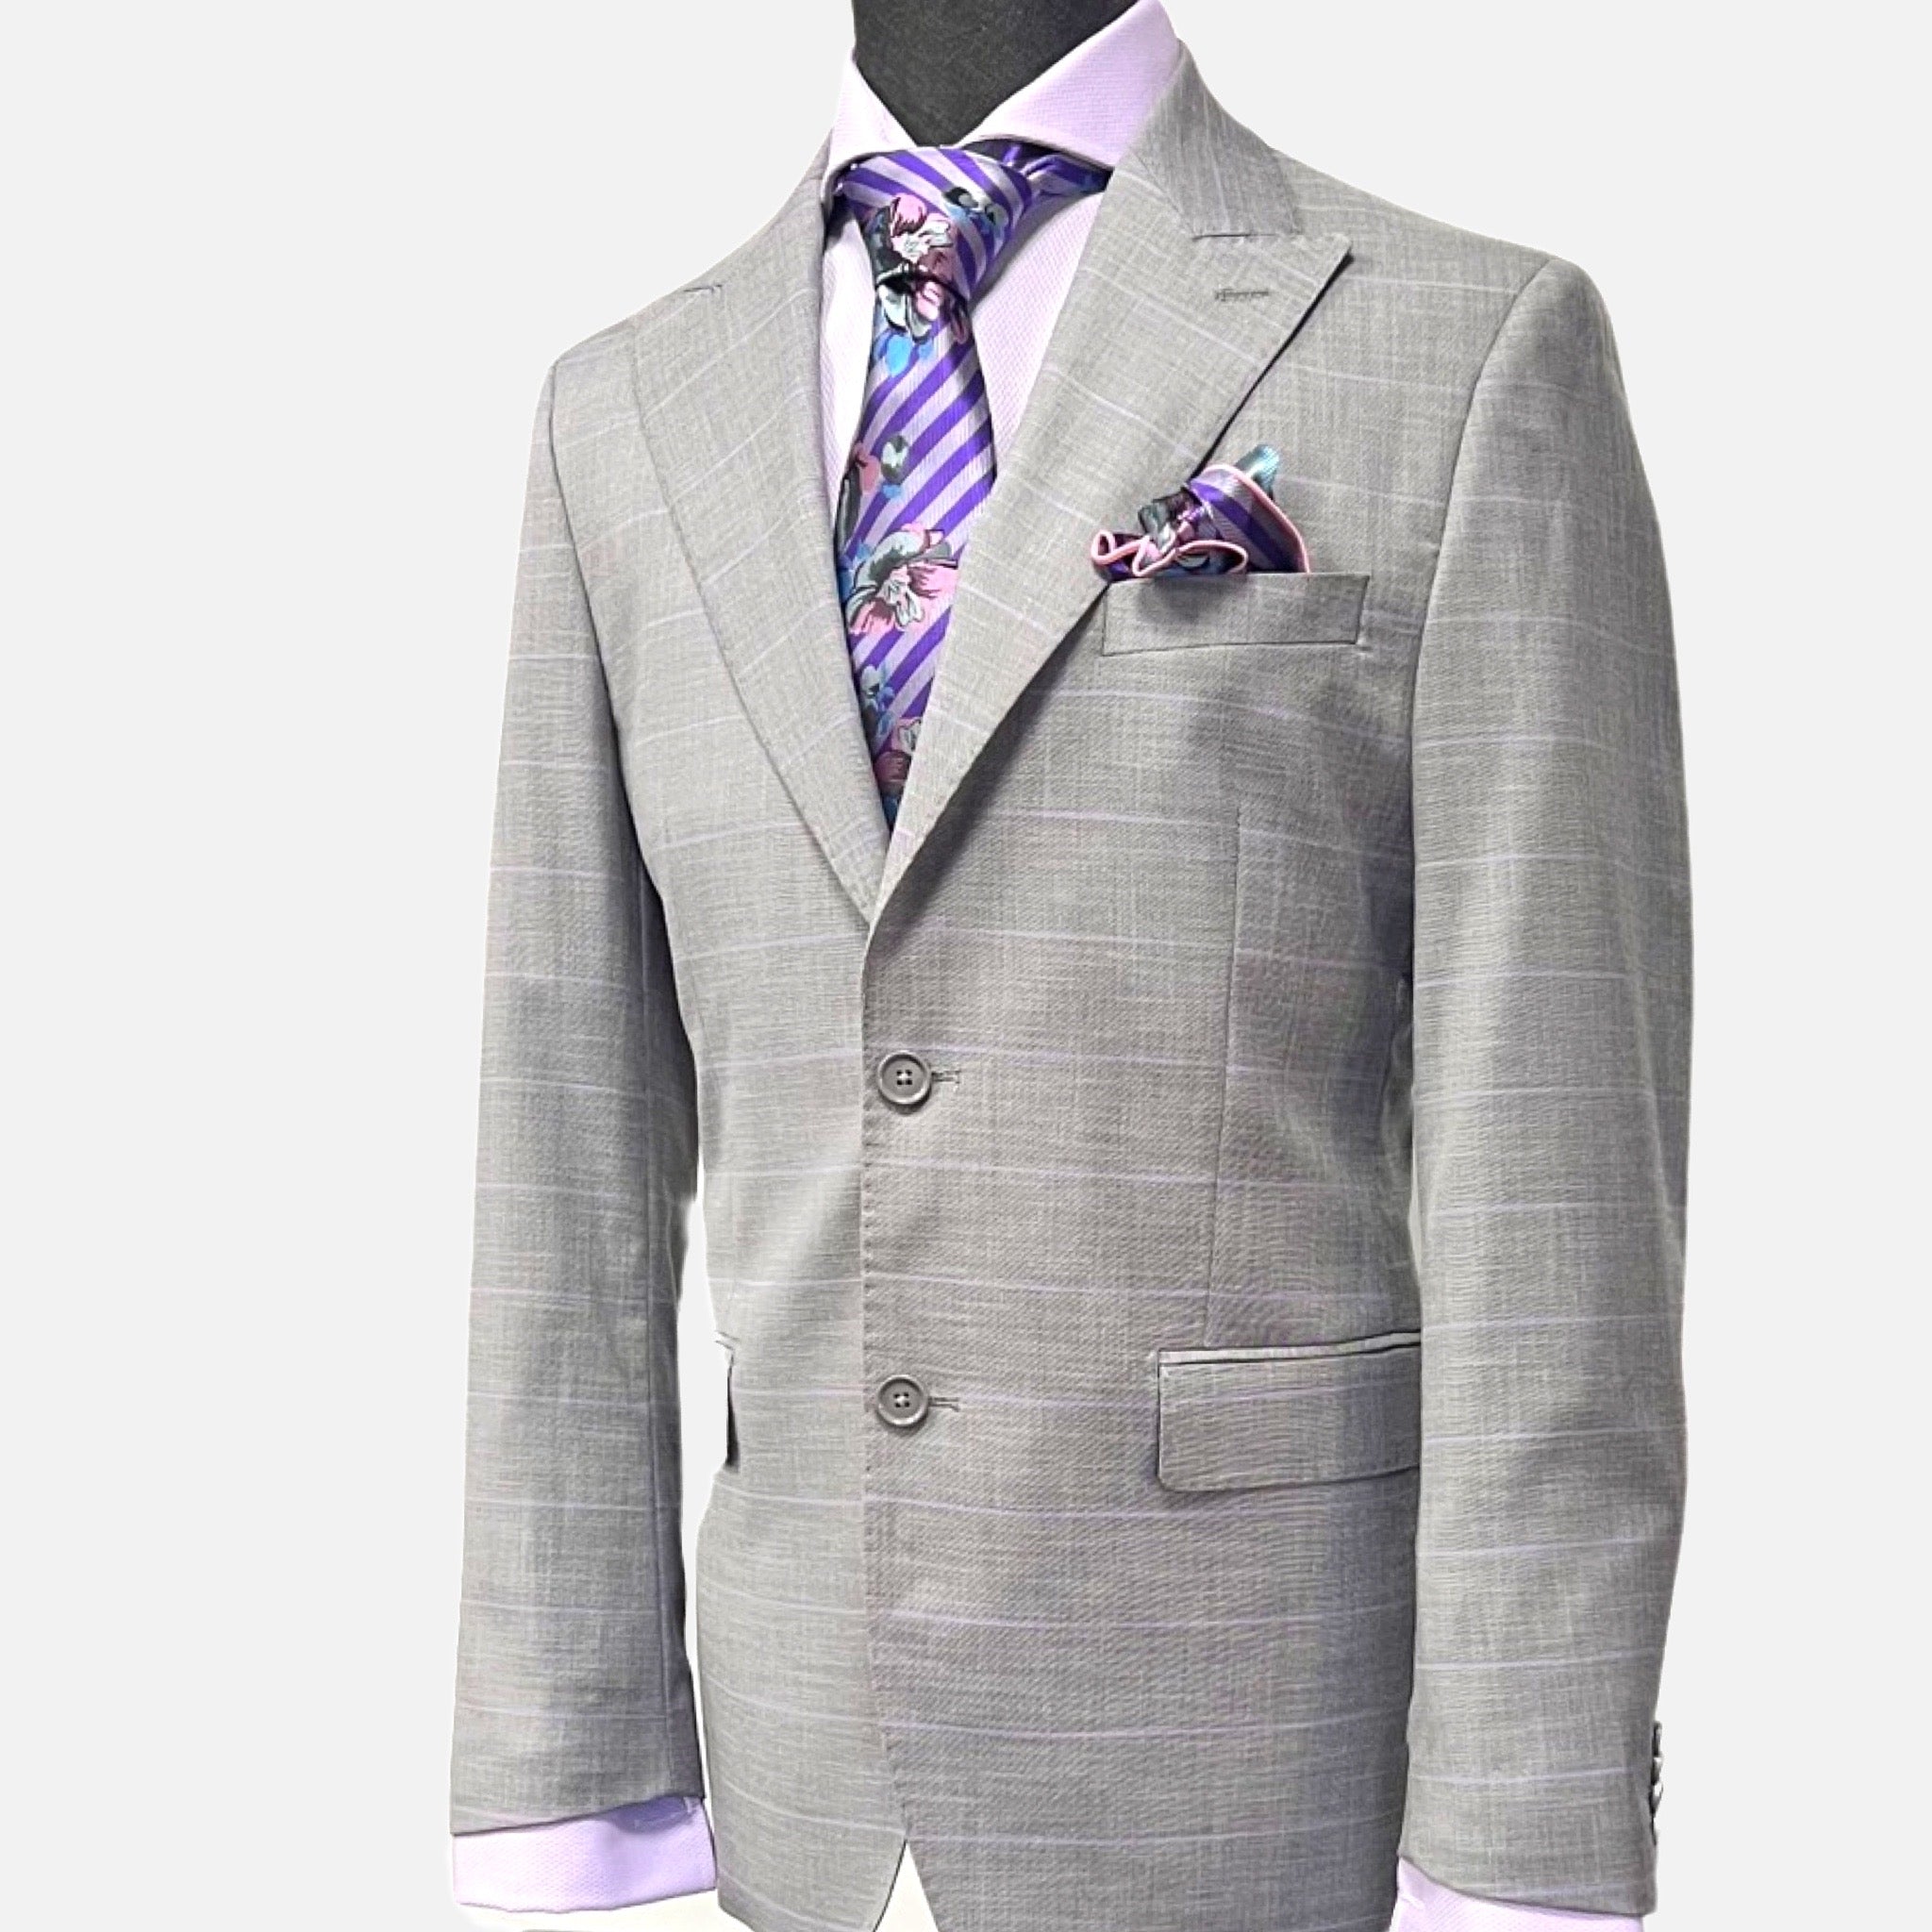 Gray with Lavender Plaid Striped Suit - Wool and Silk Blend, Modern Fit